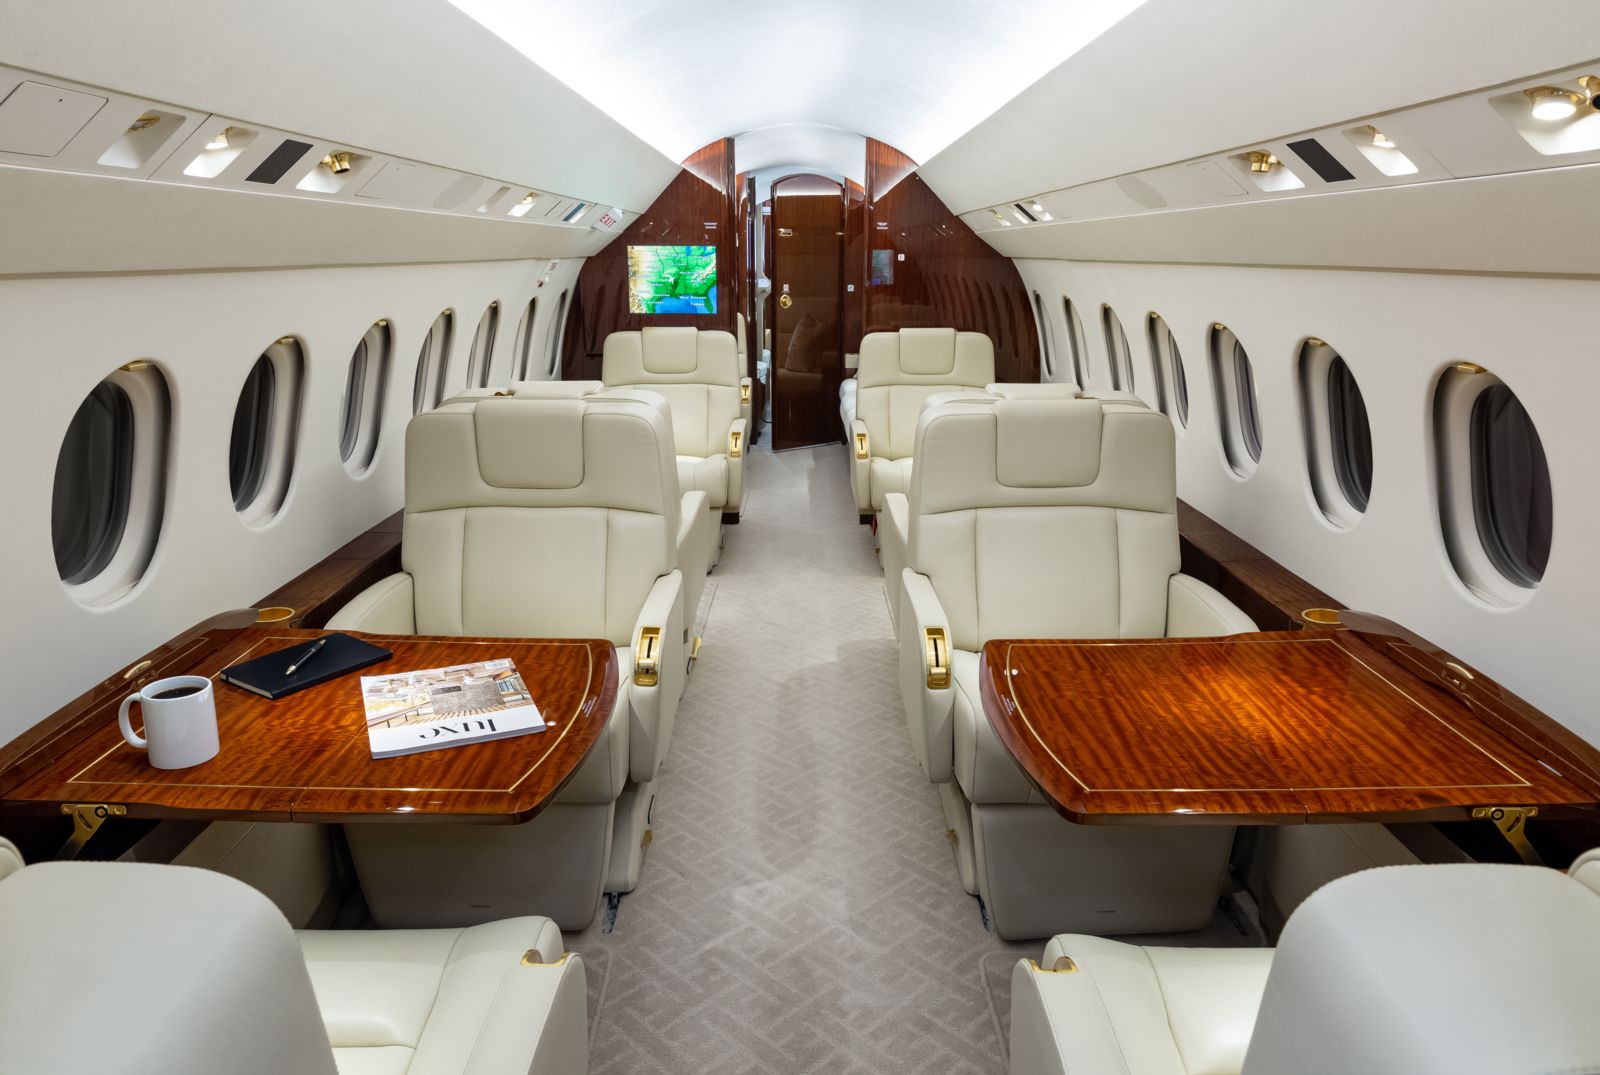 Dassault Falcon 900EX EASy gallery image /userfiles/images/F900EXy%20SN%20188/a%20fwd%20aft.jpg